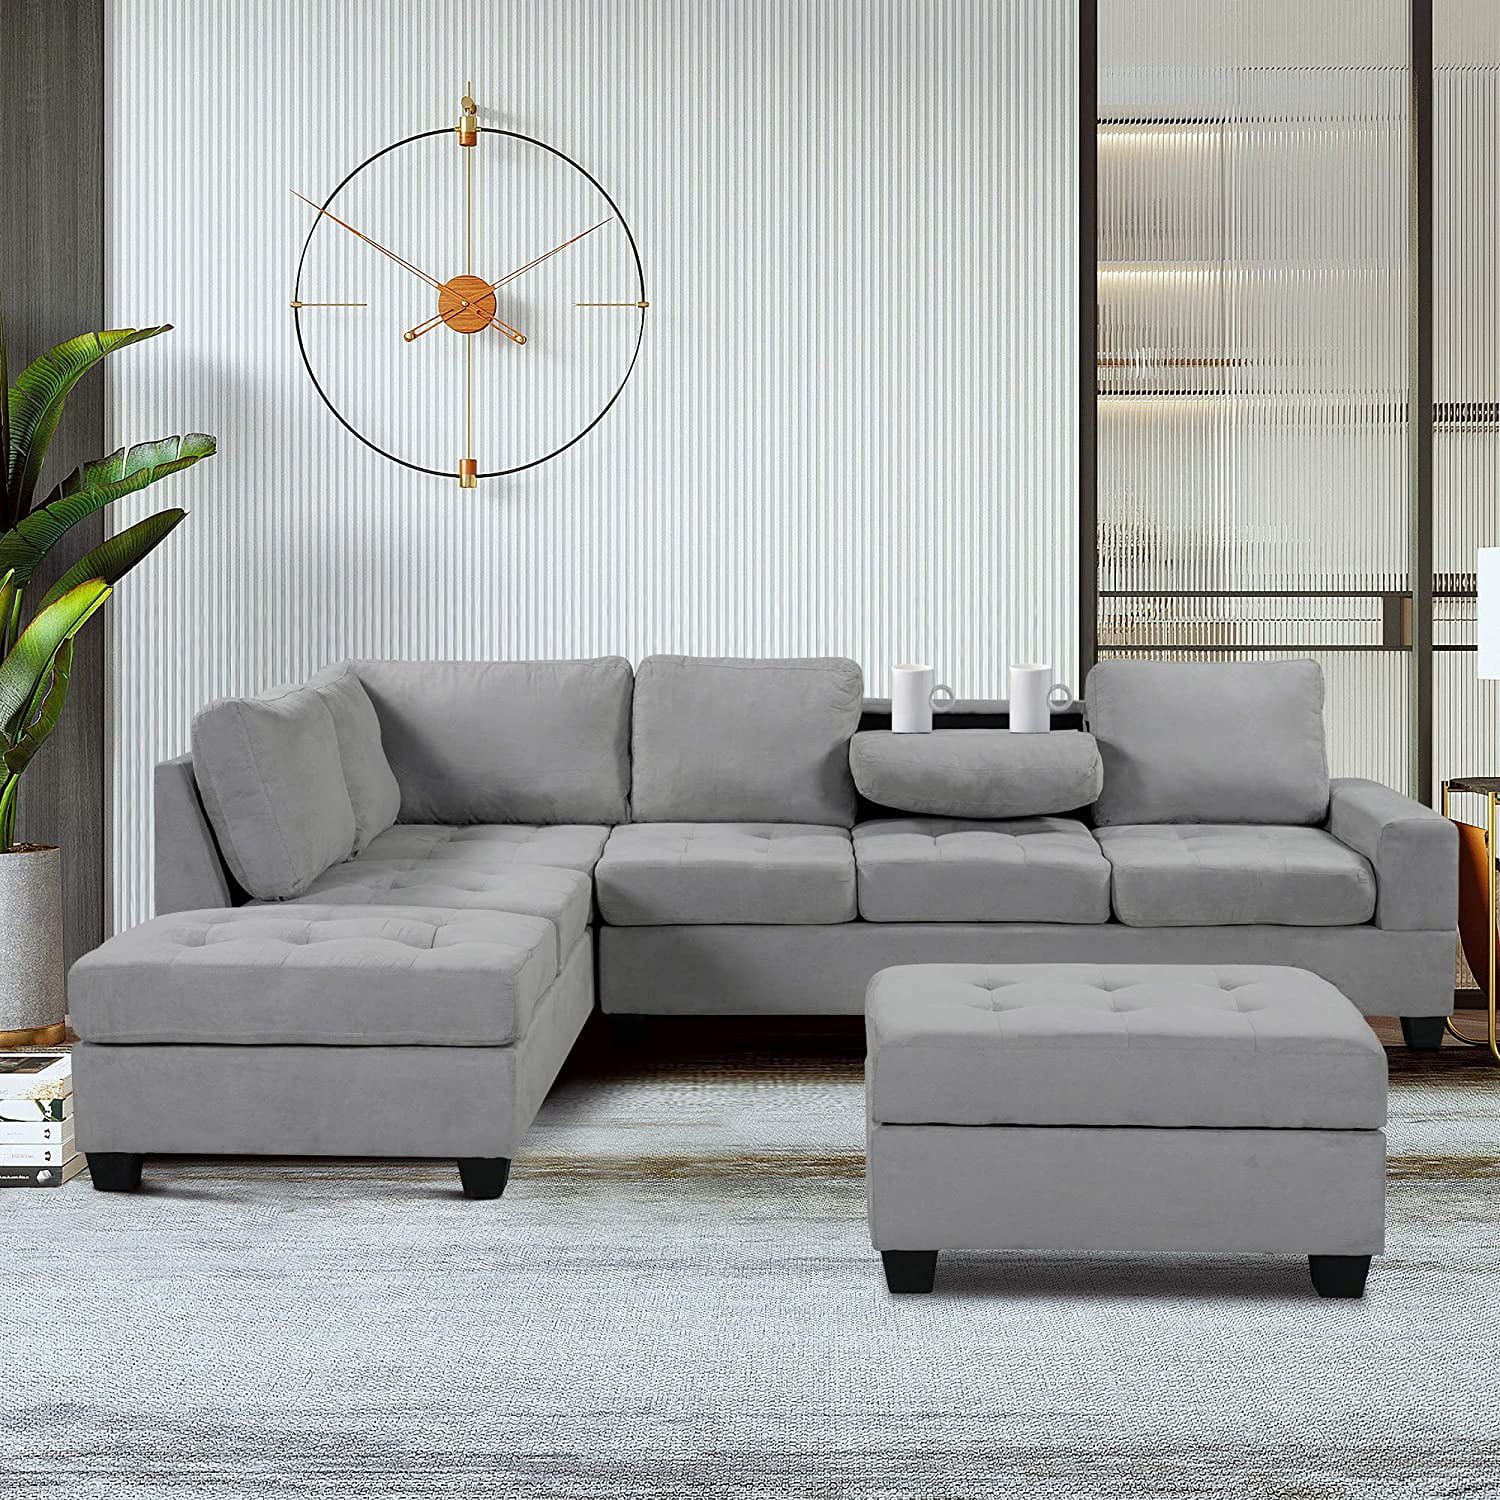 3 Piece Convertible Sectional Sofa L Shaped Couch With Reversible With Regard To 3 Seat Convertible Sectional Sofas (Gallery 7 of 20)